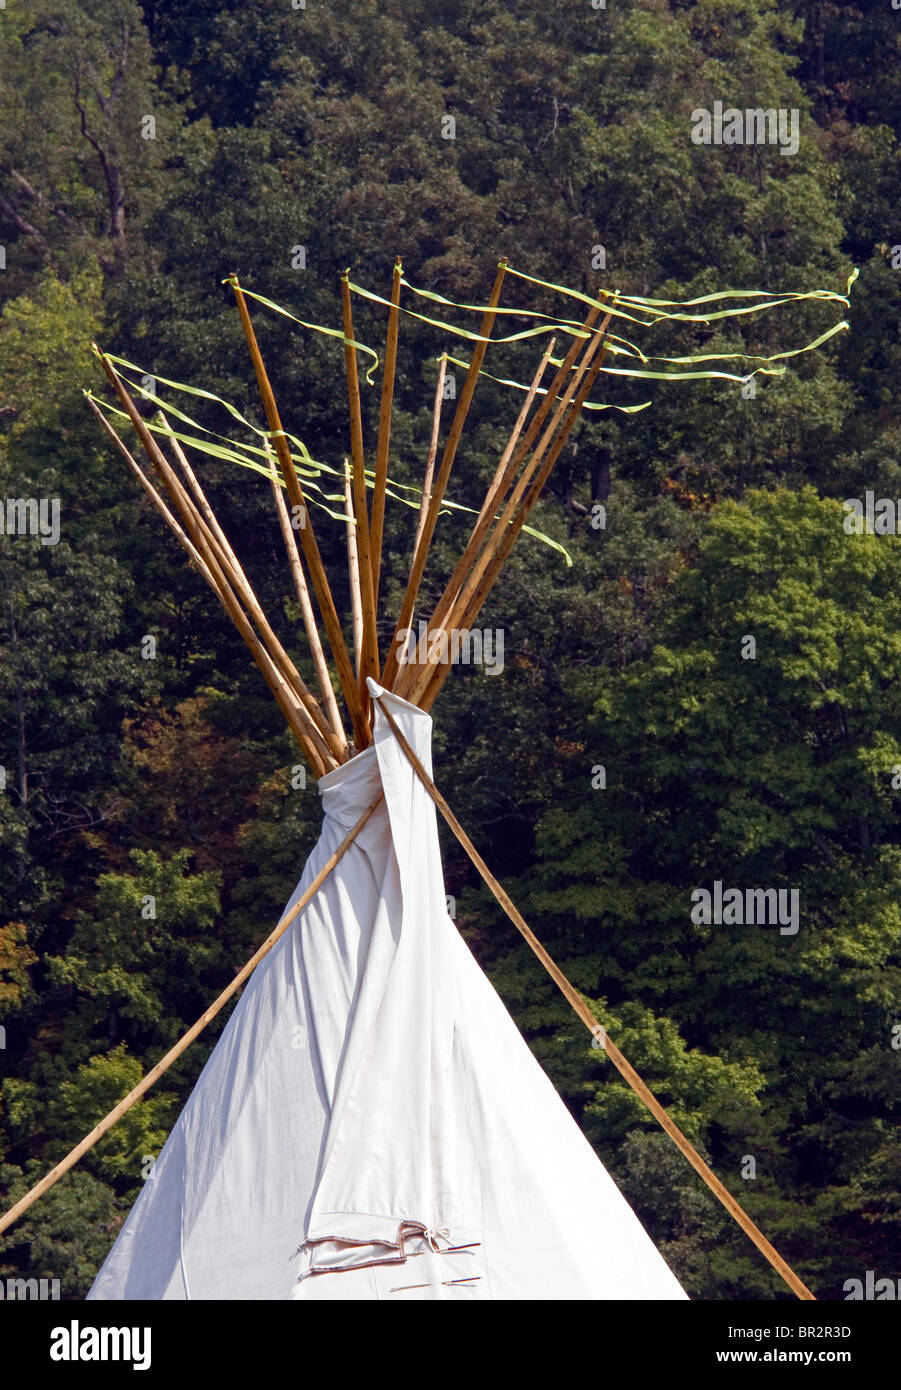 Dayton, Tennessee - Tip of a teepee set up during a powwow. Stock Photo